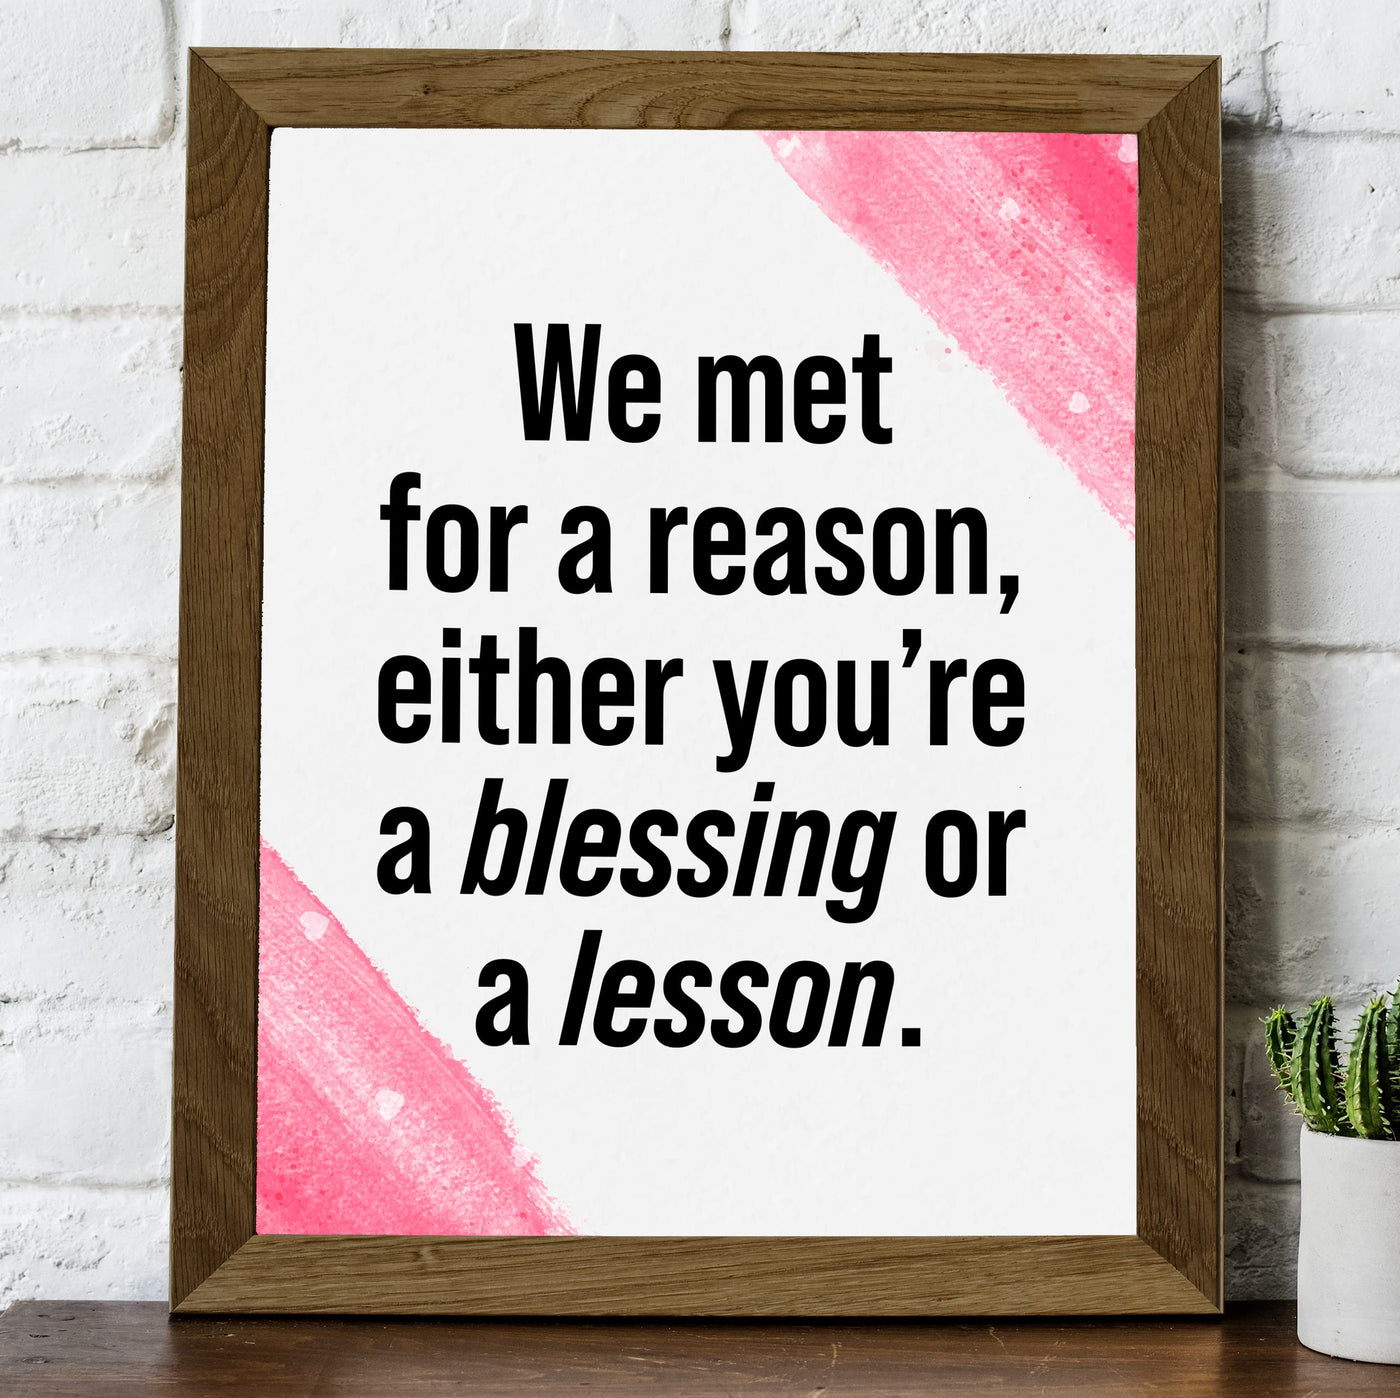 We Met for a Reason-Either You're a Blessing or a Lesson Inspirational Quotes Wall Art Sign -8x10" Love & Friendship Typography Print-Ready to Frame. Motivational Decor for Home-Office-Classroom!